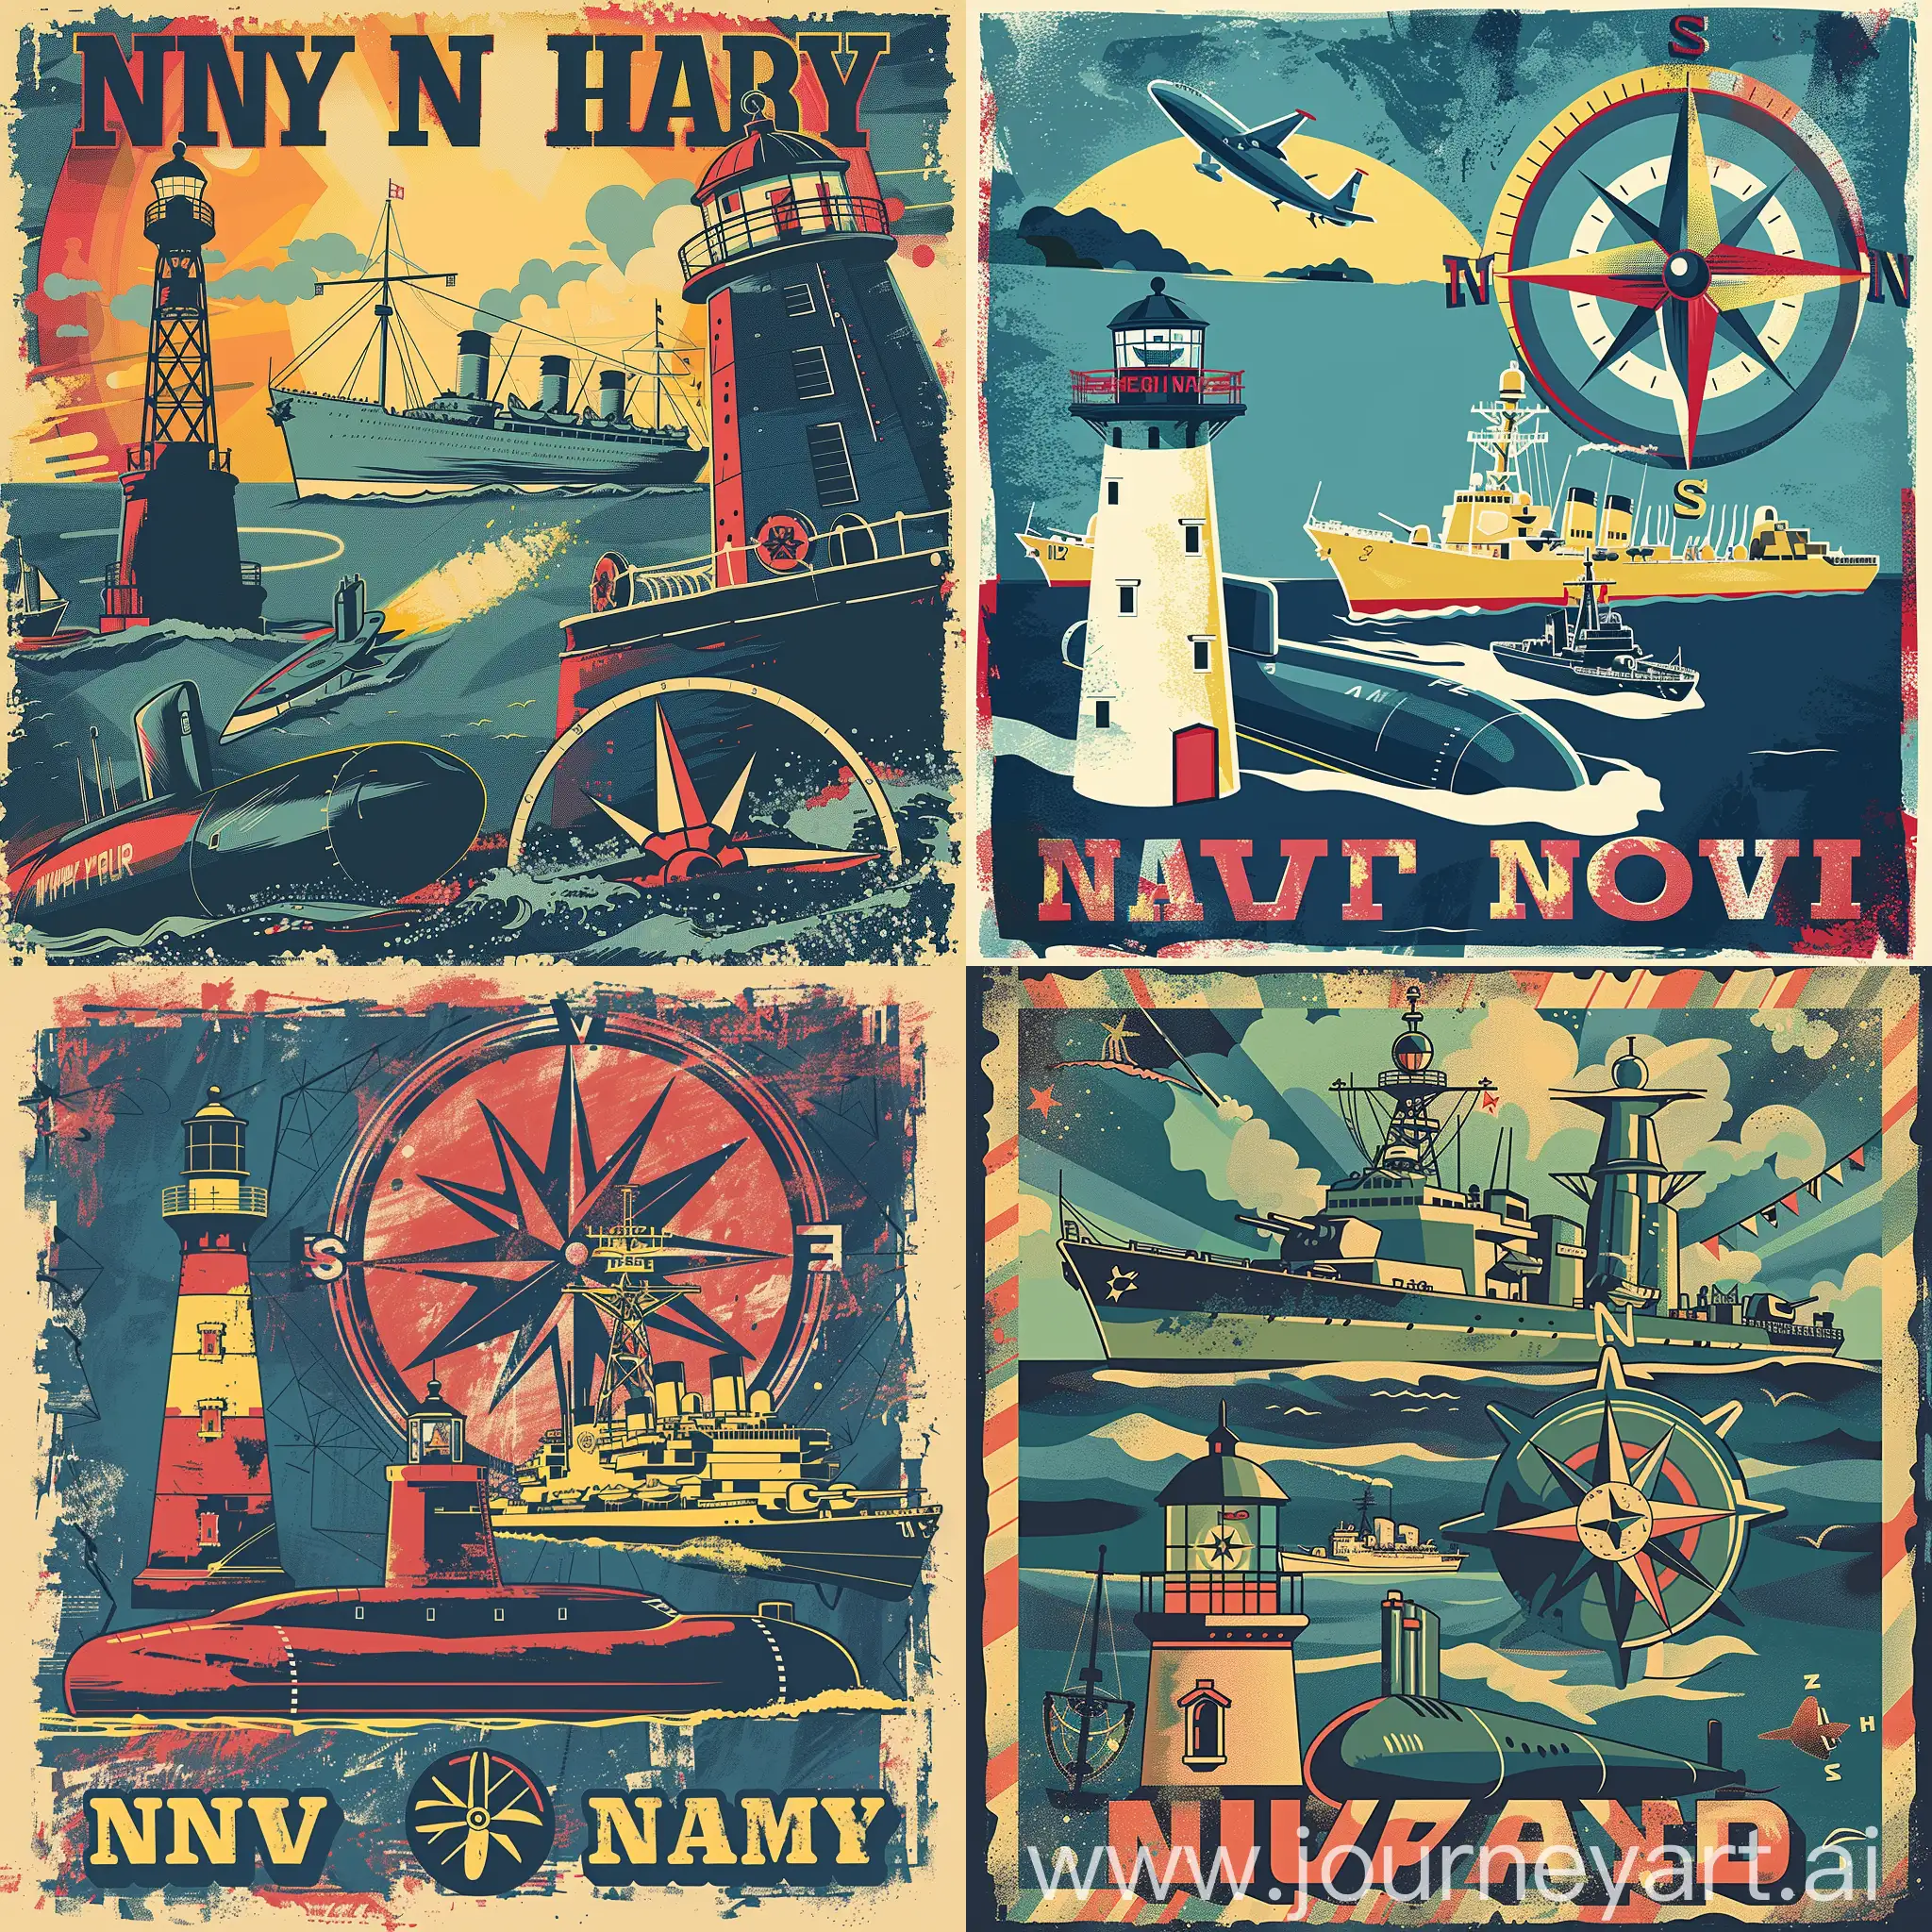 Generate a poster for the Navy (navy) with the image of warships, a lighthouse, a compass rose, and a submarine in pop art style